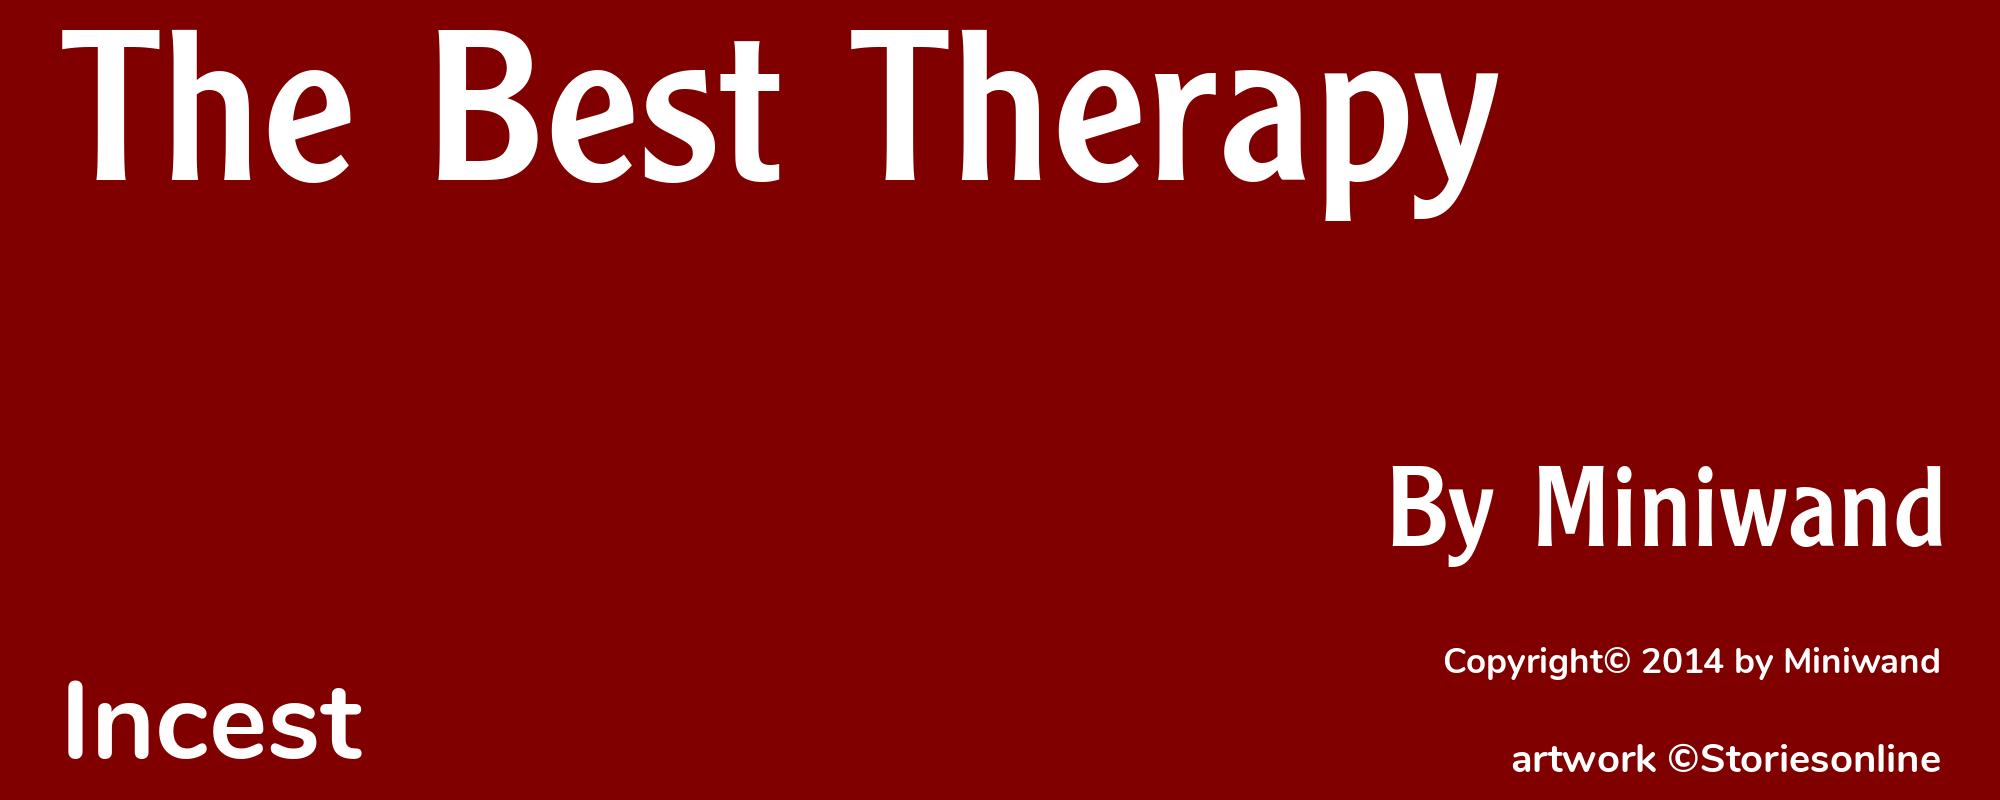 The Best Therapy - Cover